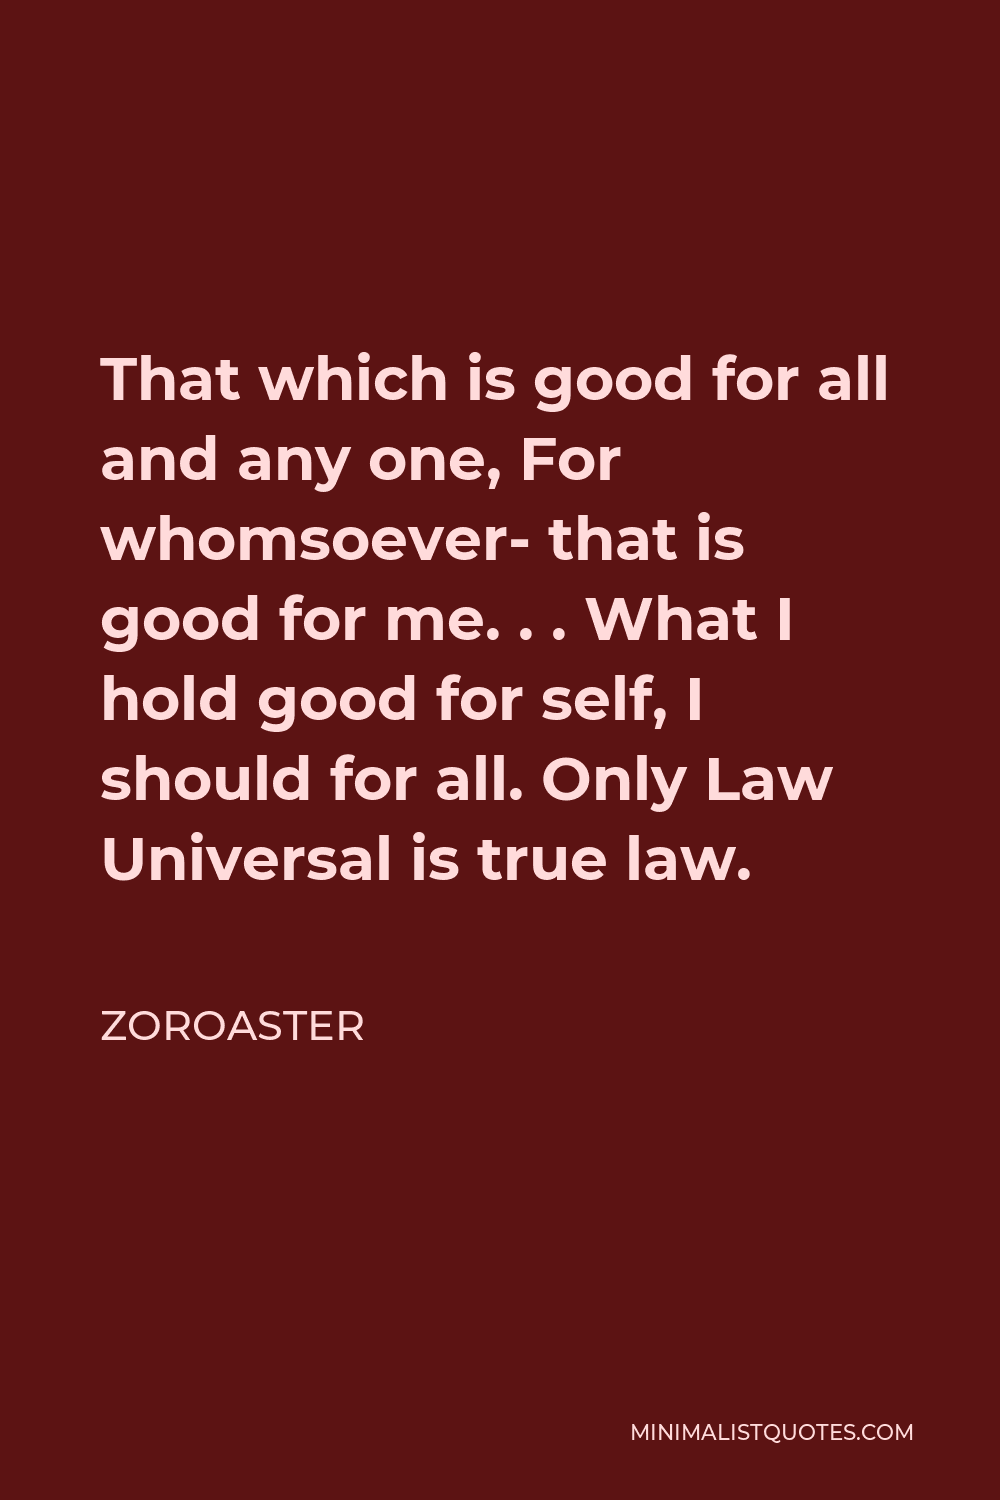 Zoroaster Quote - That which is good for all and any one, For whomsoever- that is good for me. . . What I hold good for self, I should for all. Only Law Universal is true law.